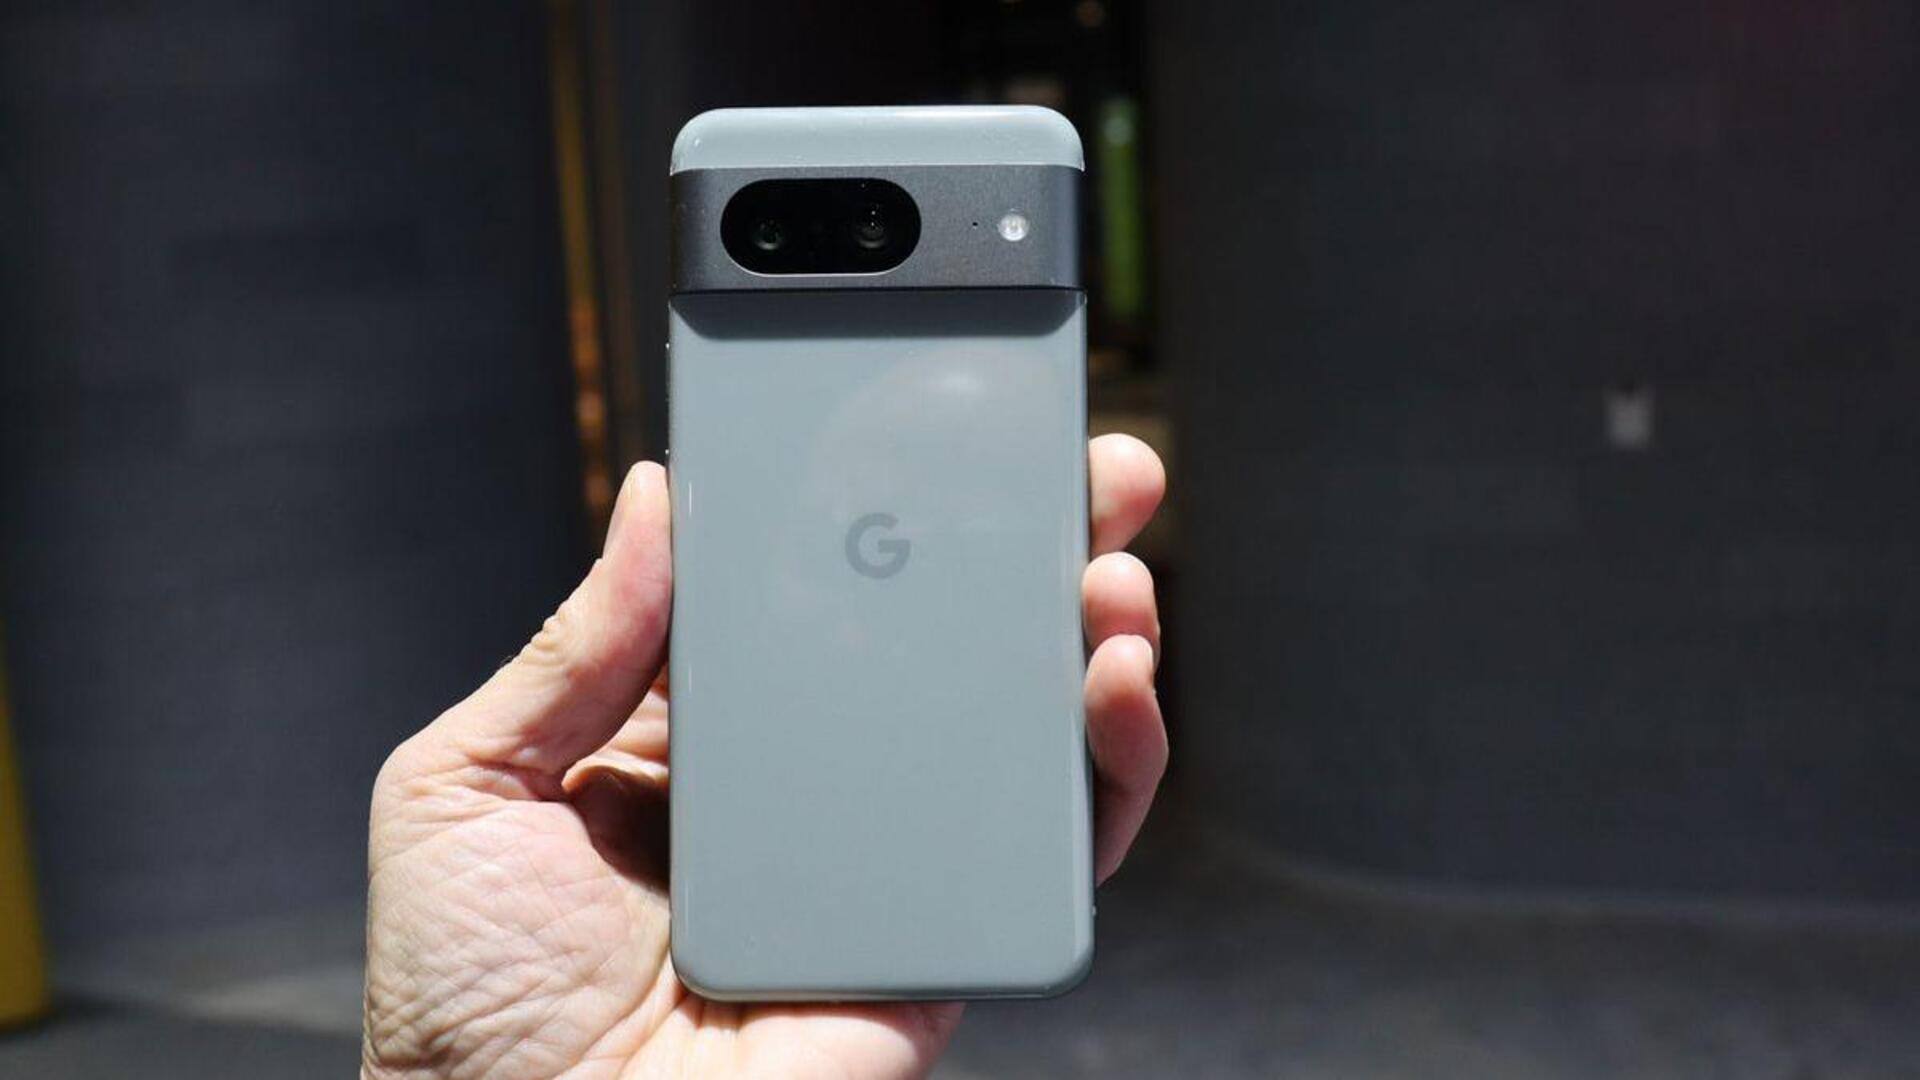 Google Pixel devices may soon get iPhone-like Satellite SOS feature